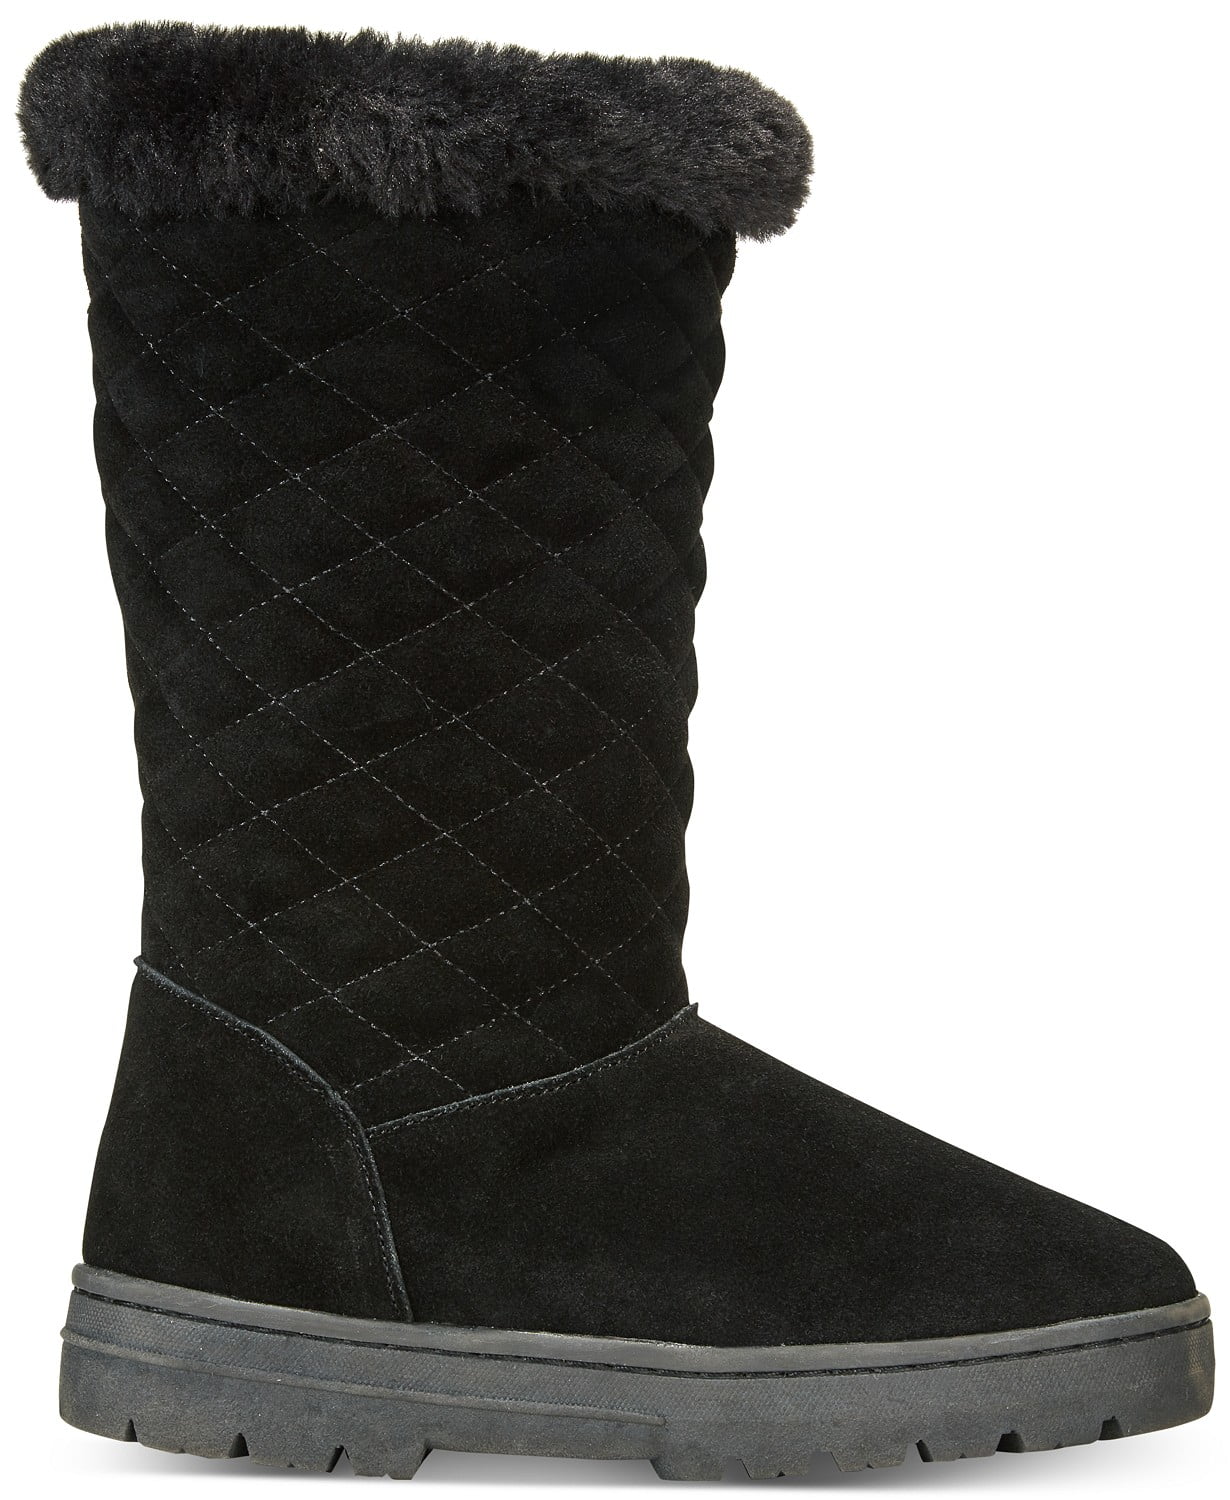 woocommerce-673321-2209615.cloudwaysapps.com-style-amp-co-womens-black-suede-nickyy-cold-weather-boots